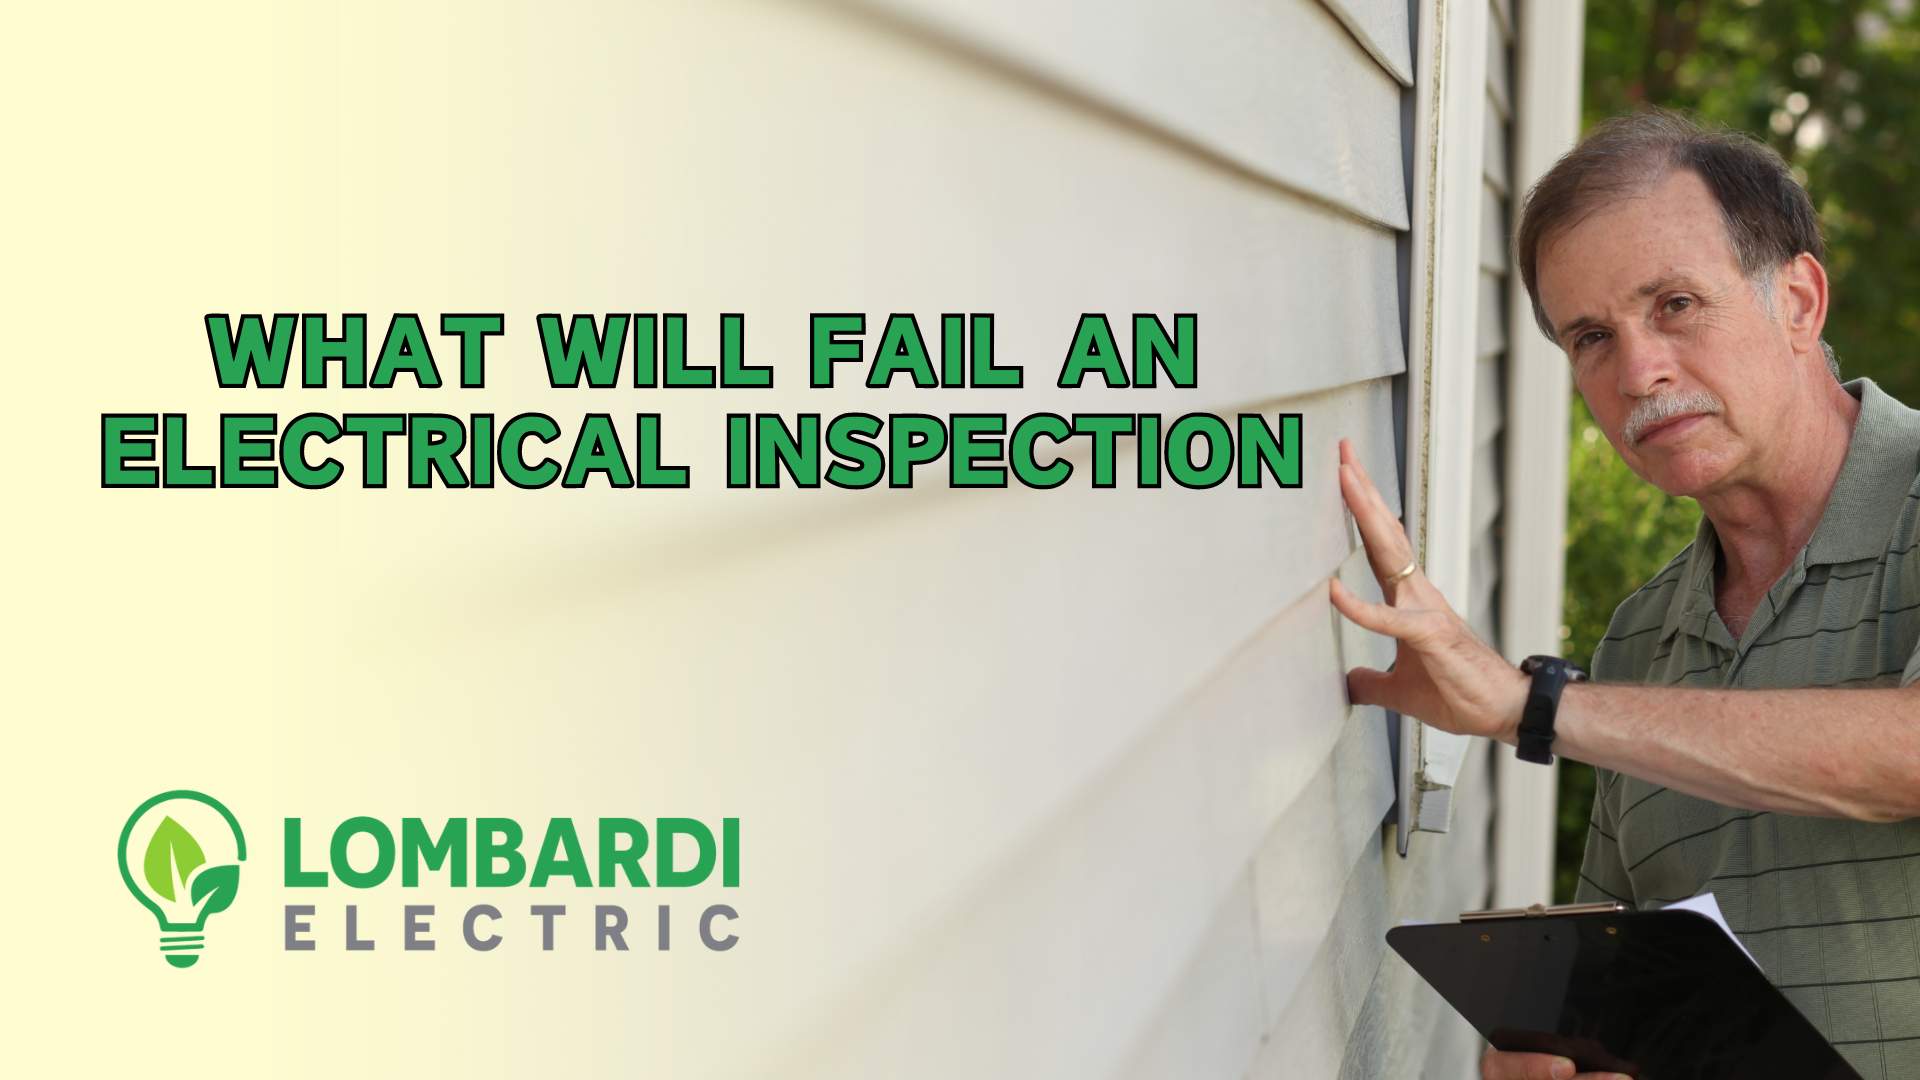 What Will Fail an Electrical Inspection in Louisiana